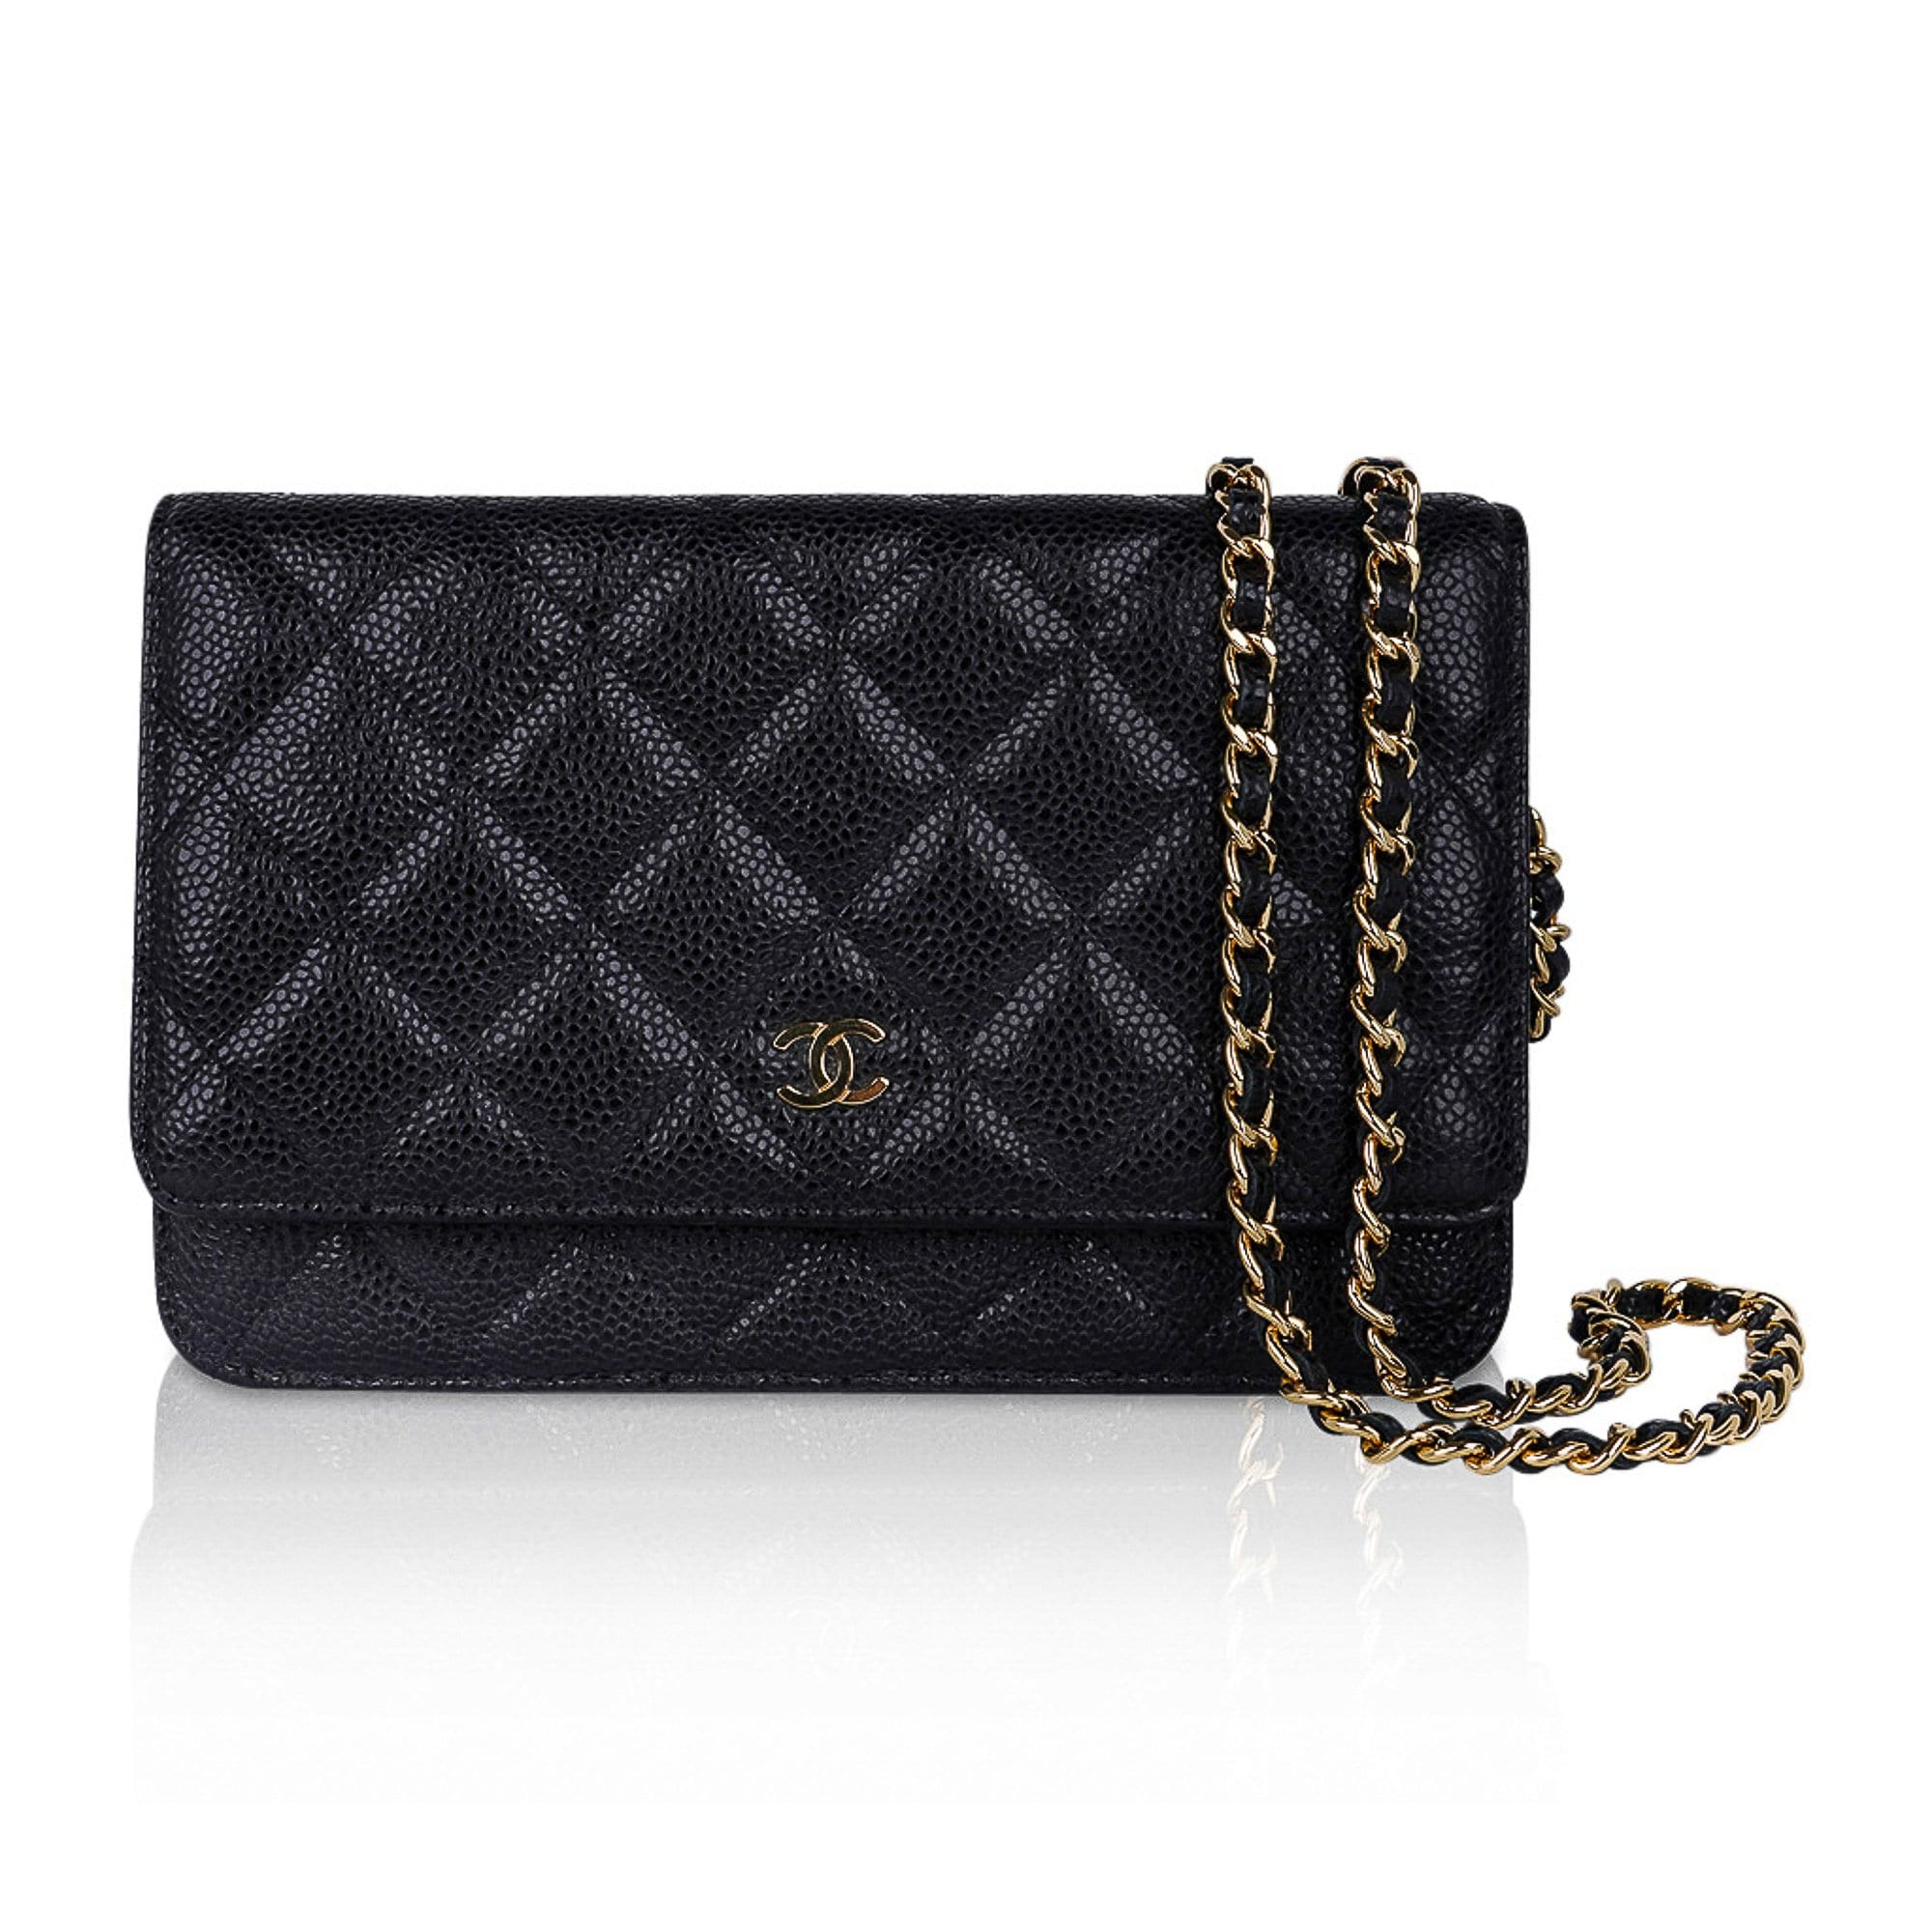 Chanel Wallet on Chain WOC Caviar Black Quilted Leather Bag w/Box